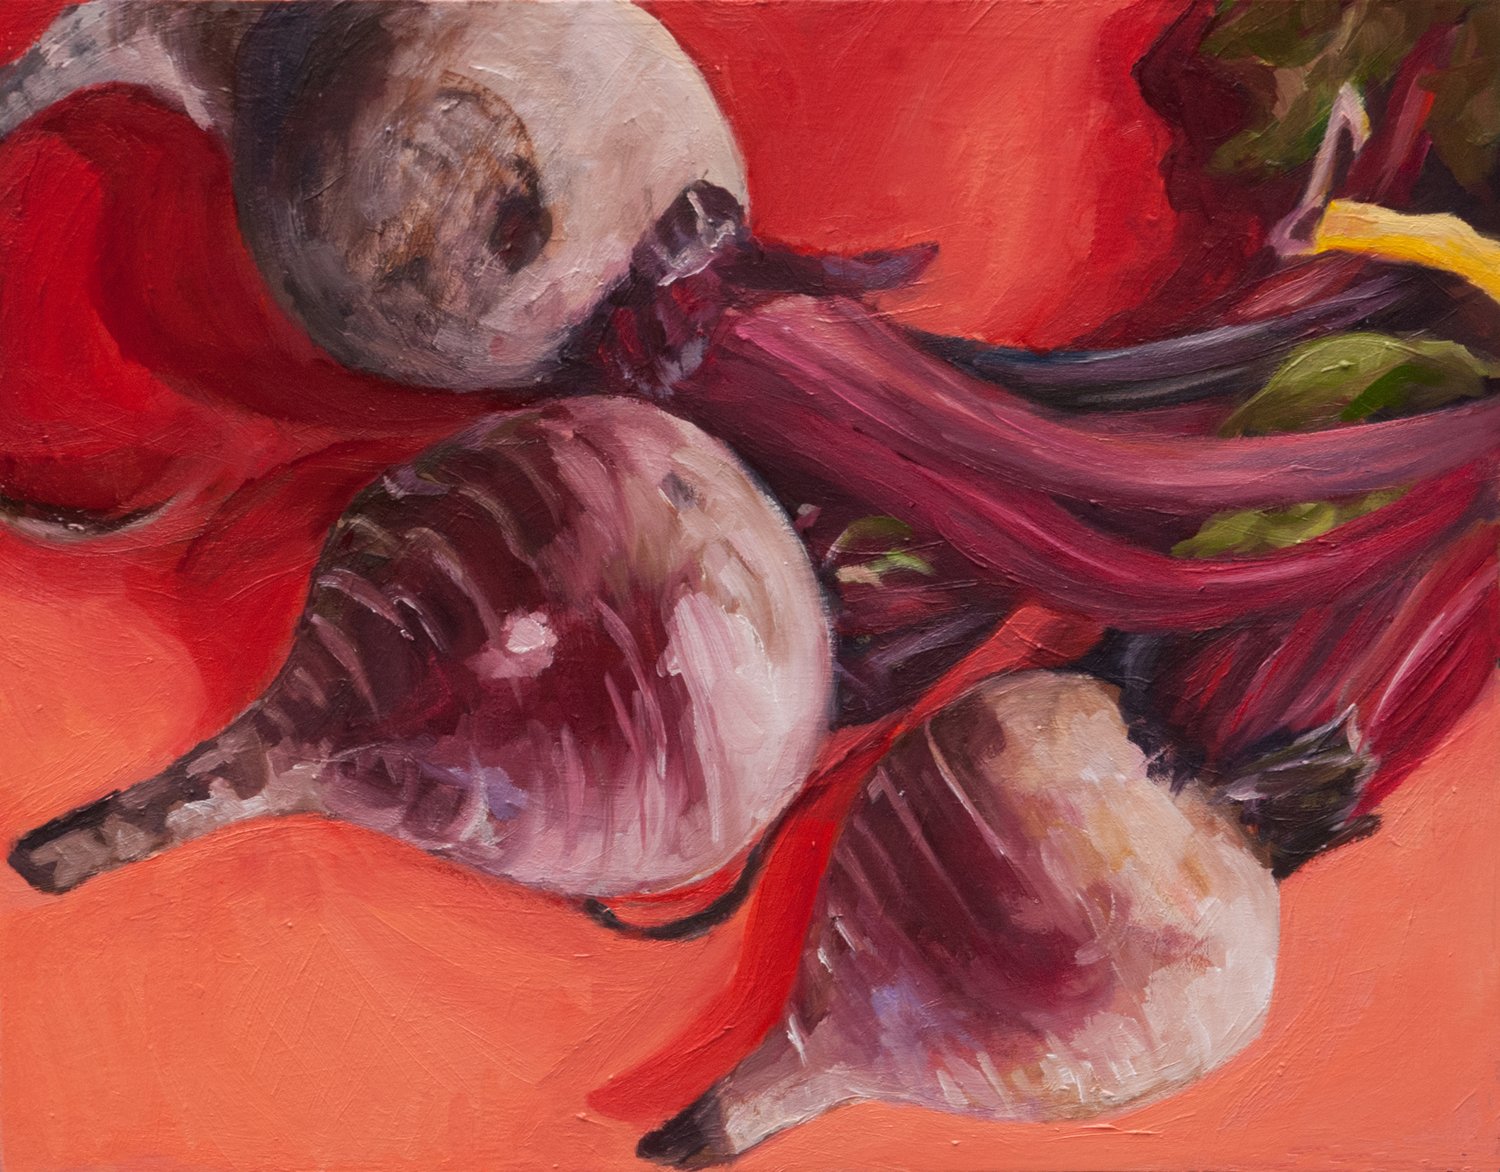 Beets on Cadmium Red